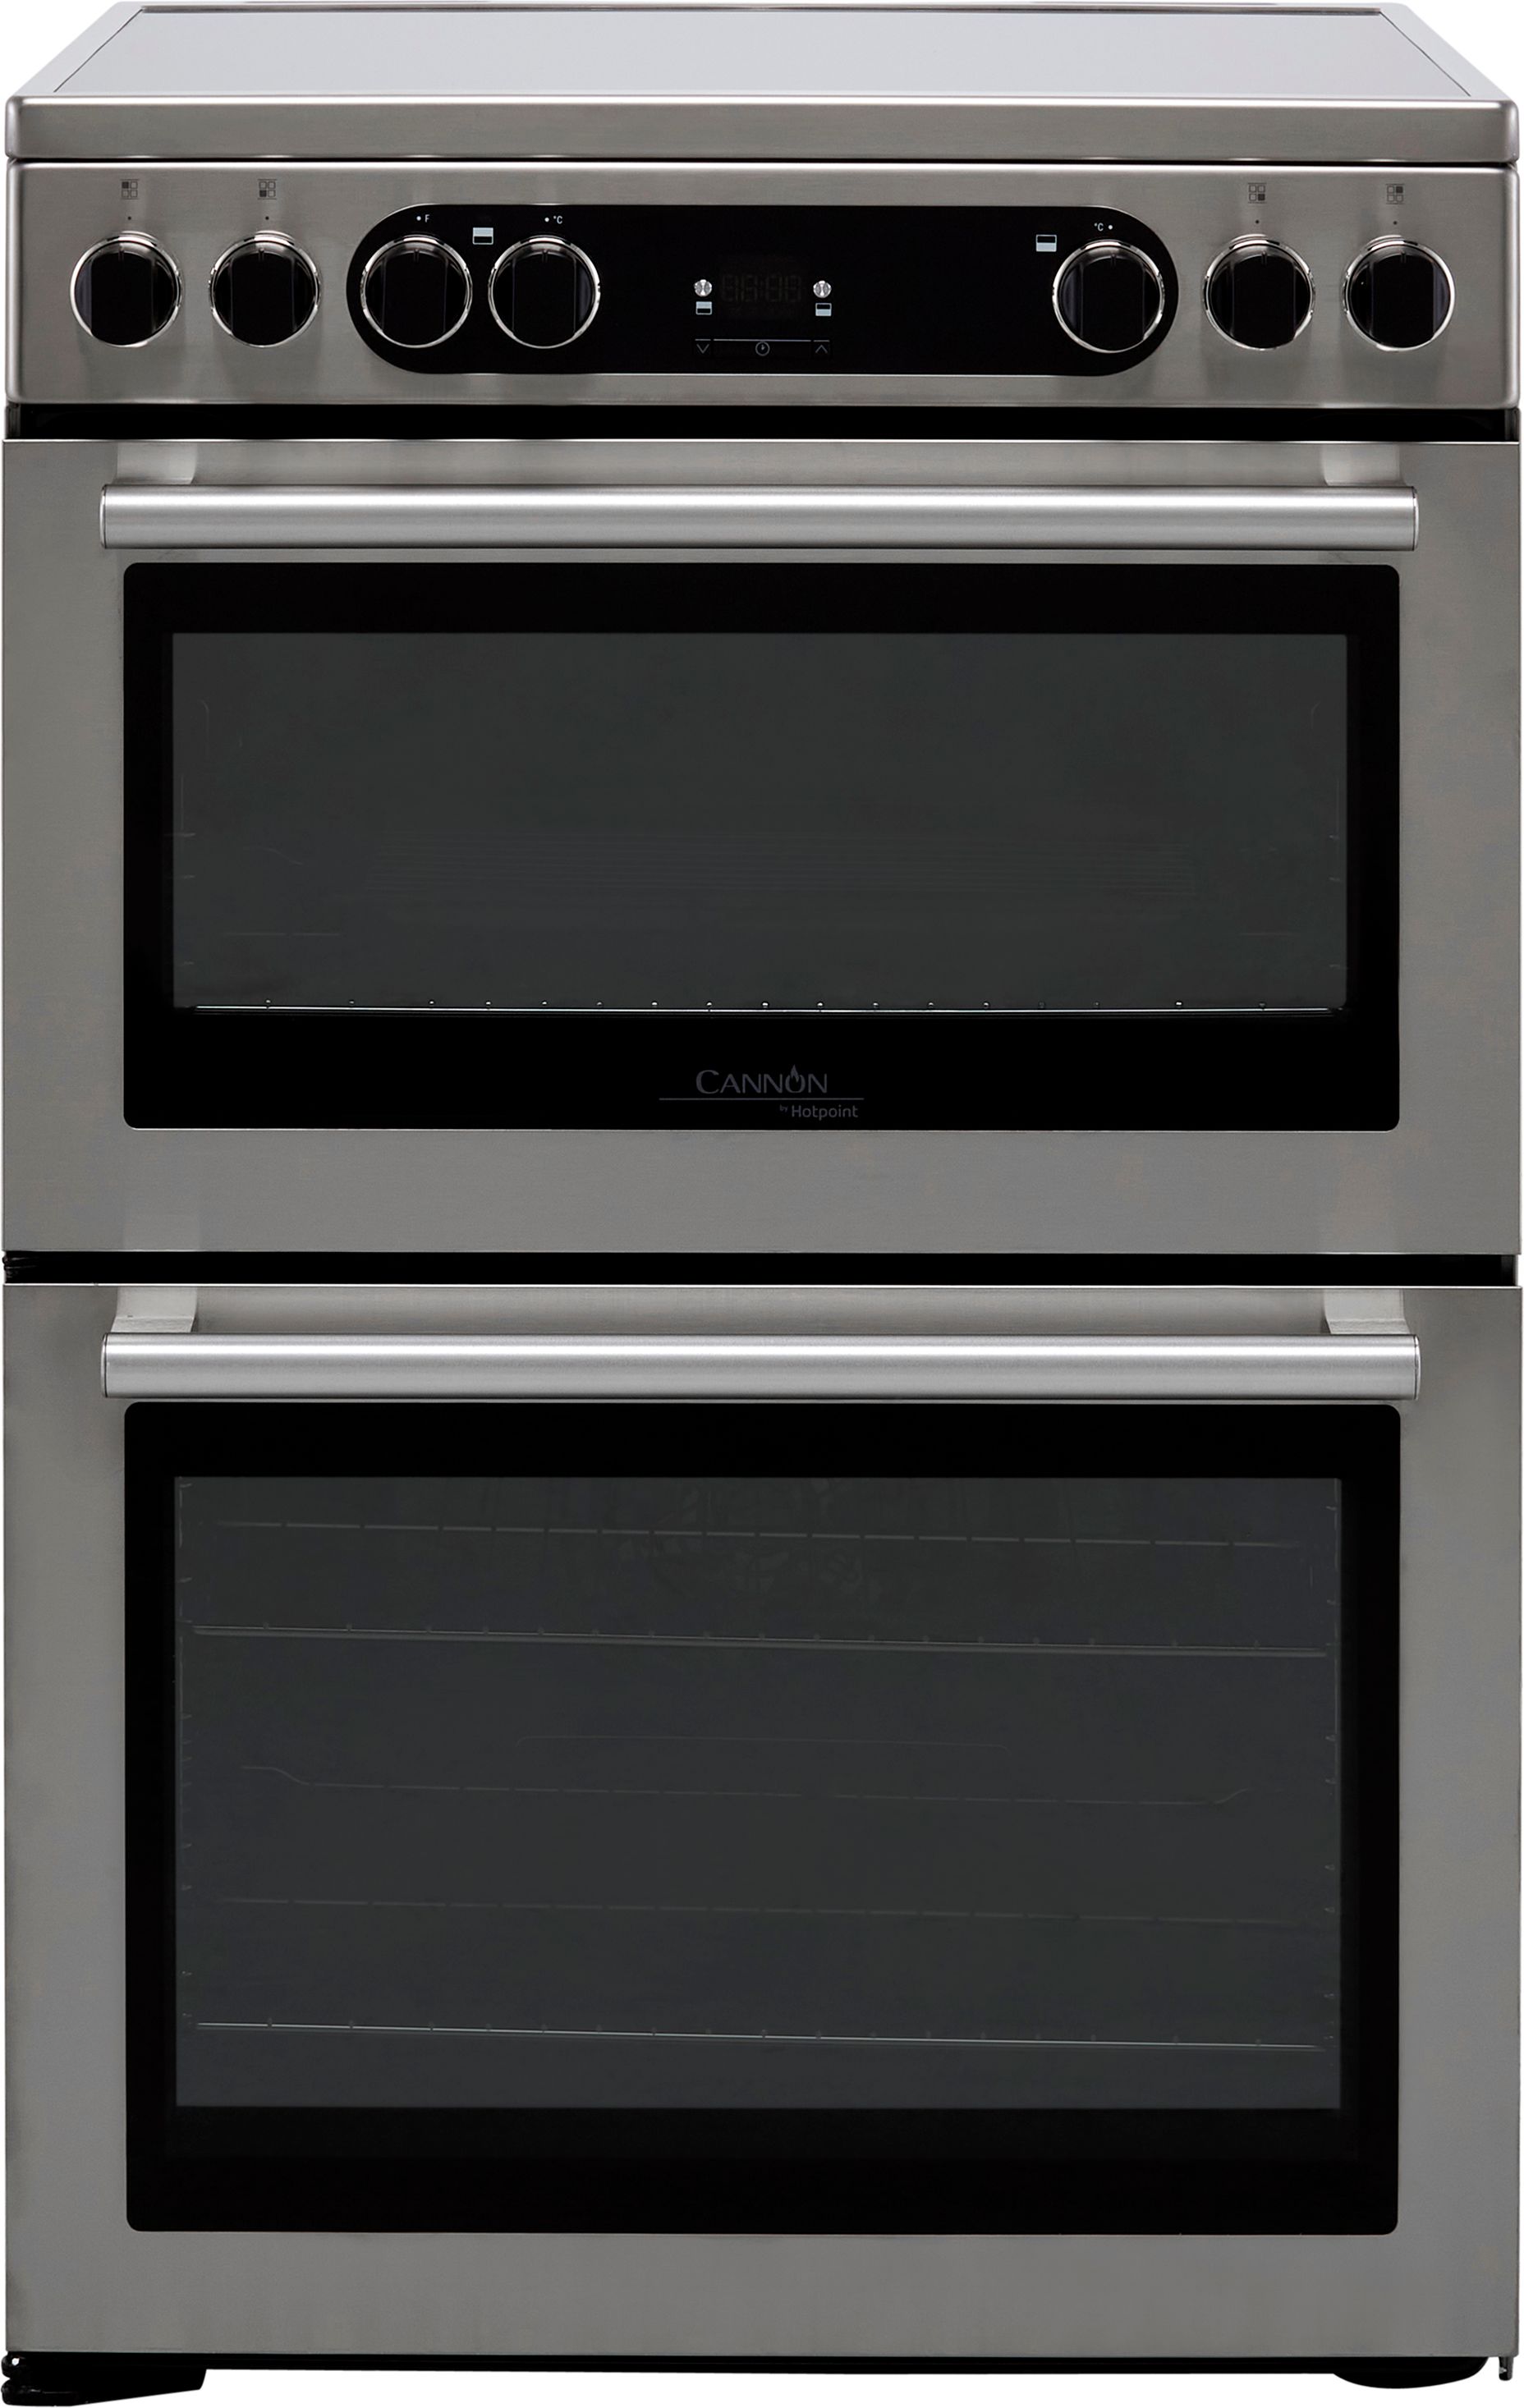 Cannon by Hotpoint CD67V9H2CX/U 60cm Electric Cooker with Ceramic Hob - Stainless Steel - A/A Rated, Stainless Steel